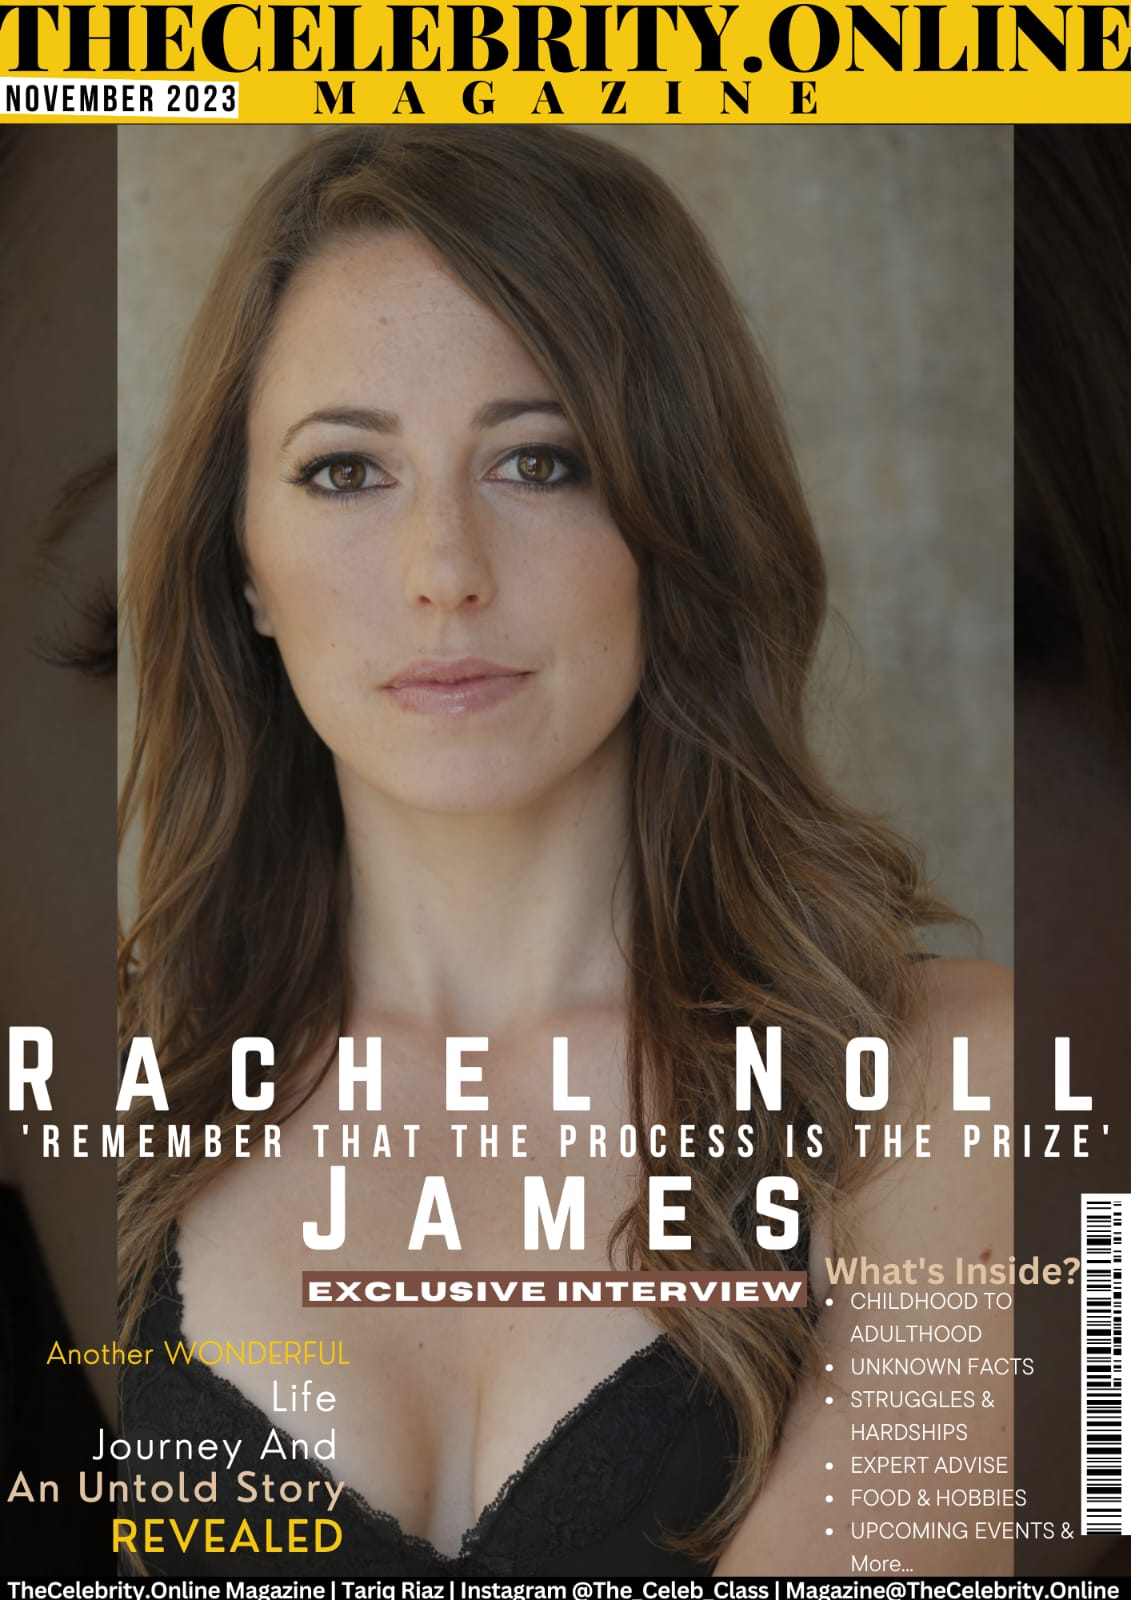 Filmmaker Rachel Noll James Exclusive Interview – ‘Remember That The Process Is The Prize’